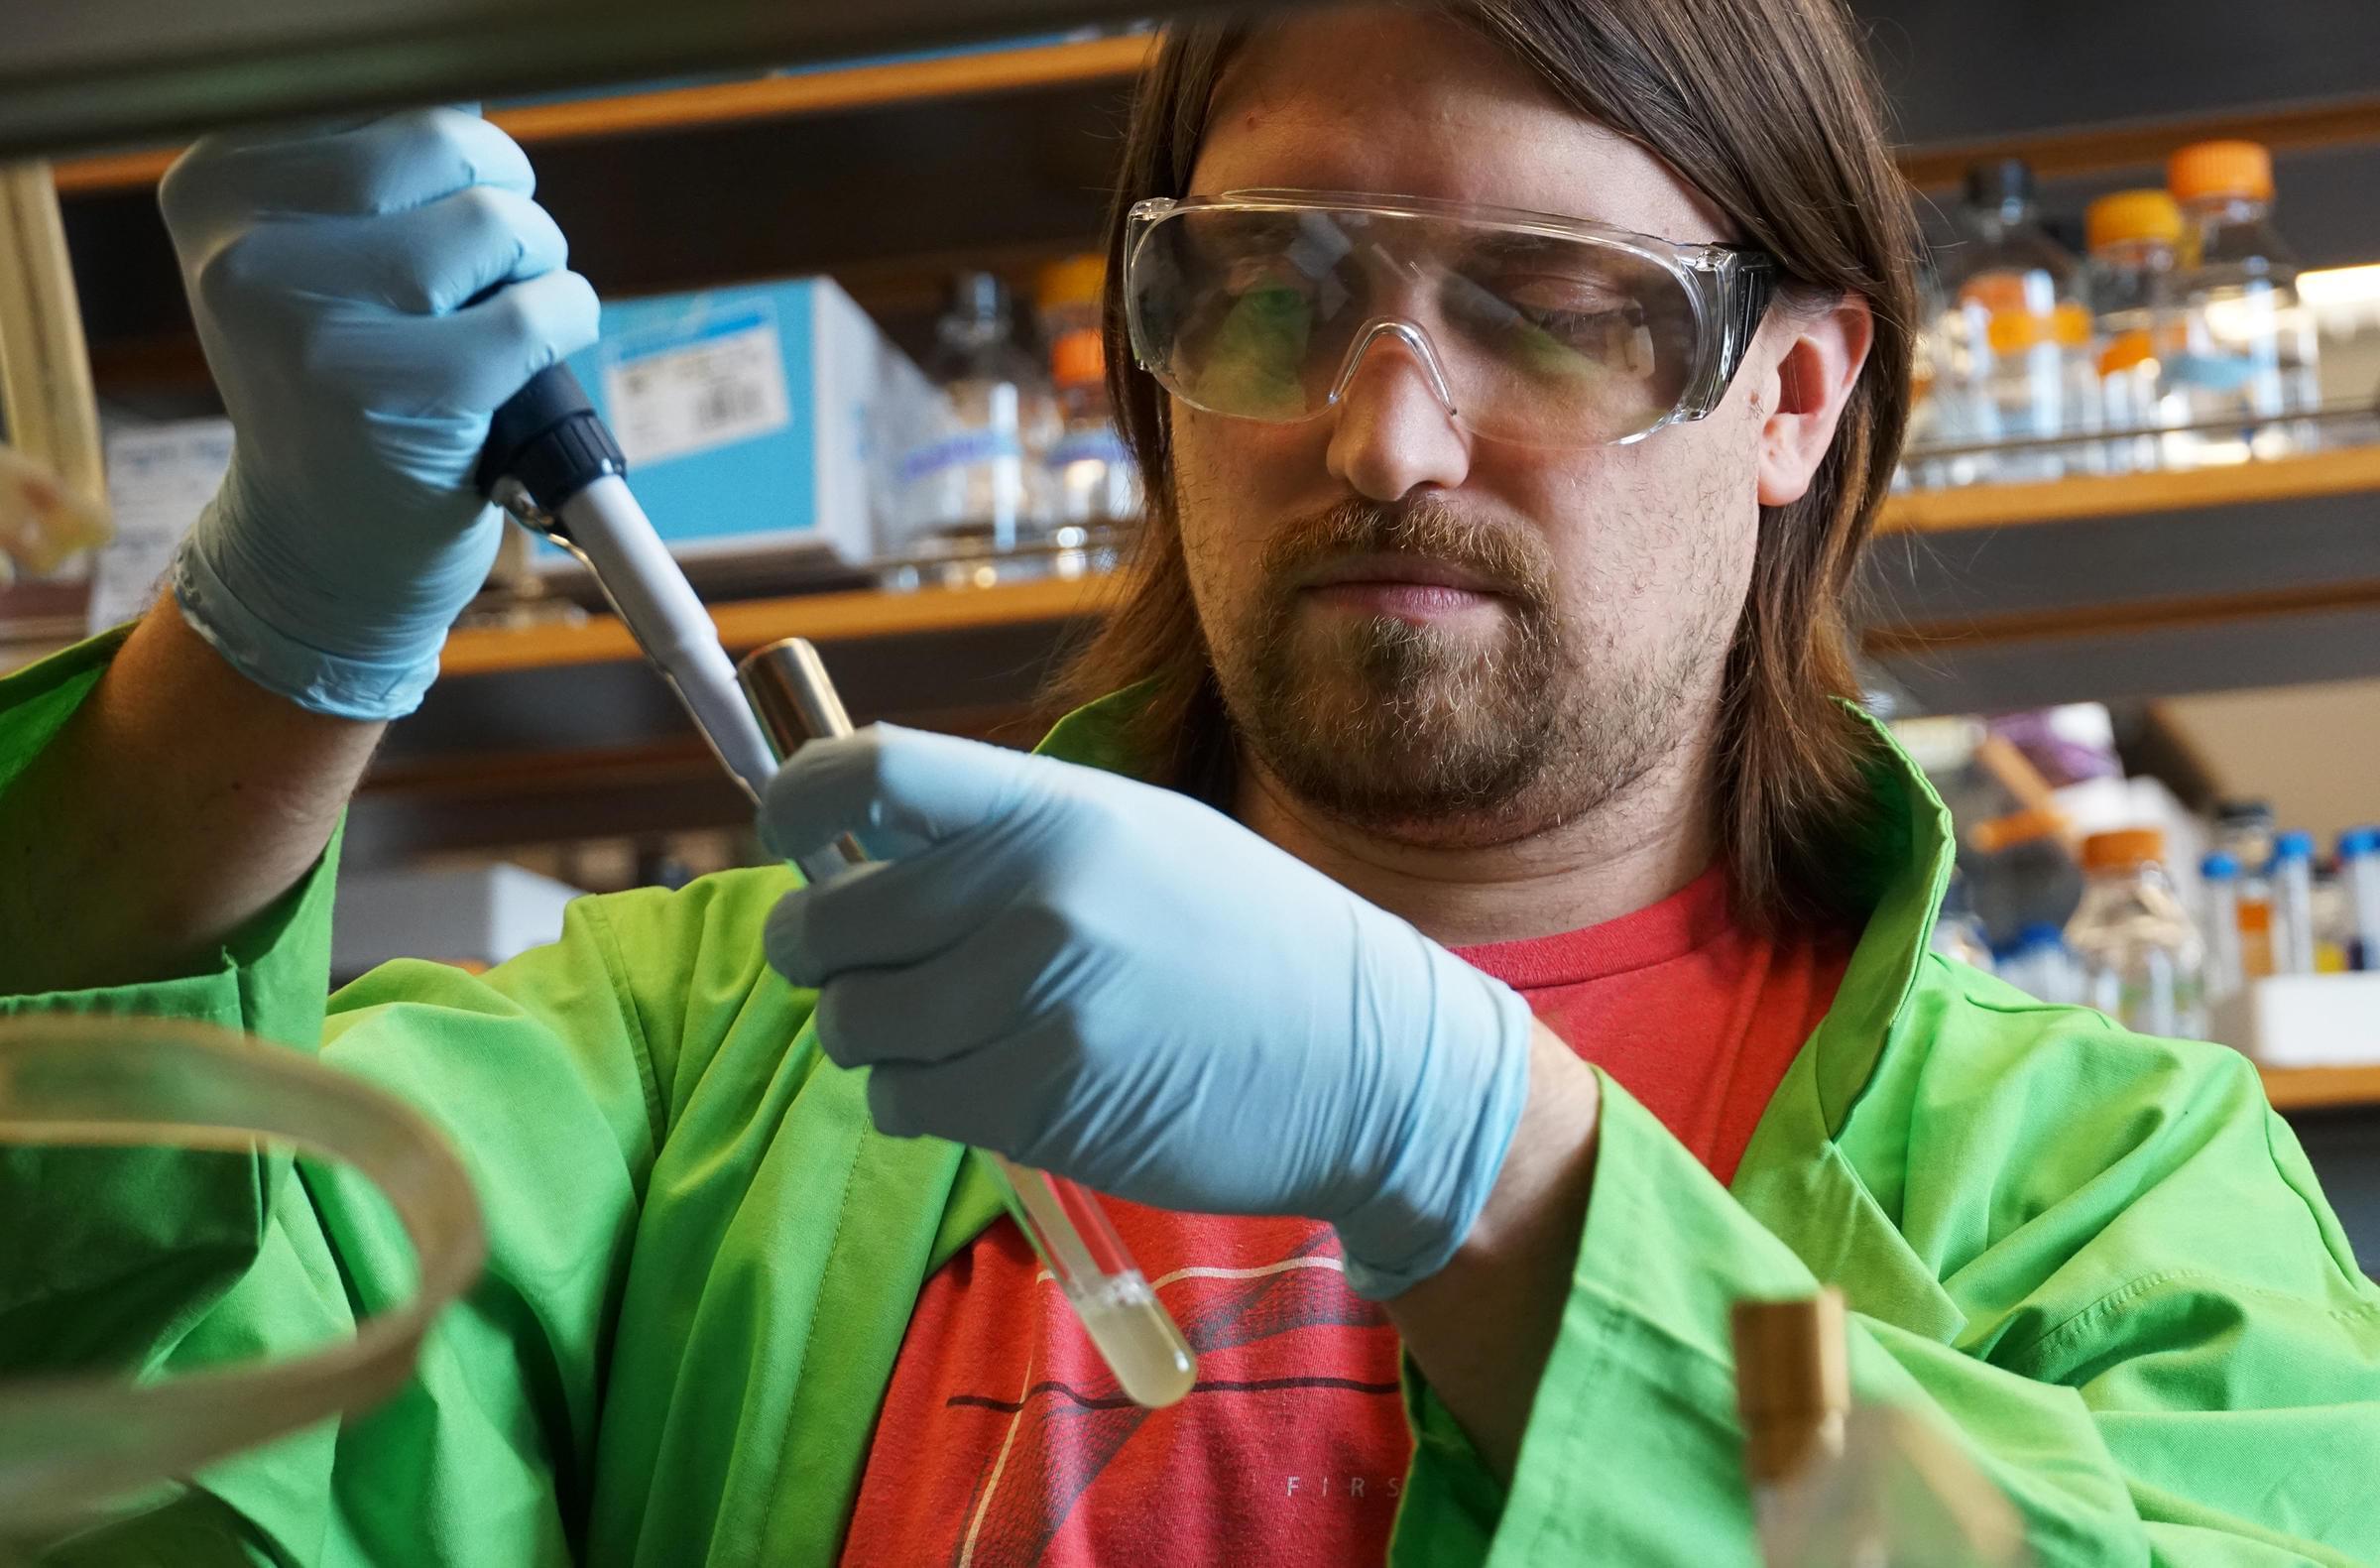 Washington University postdoctoral researcher Corey Westfall is part of a team investigating how the chemical triclosan interferes with antibiotic treatment.